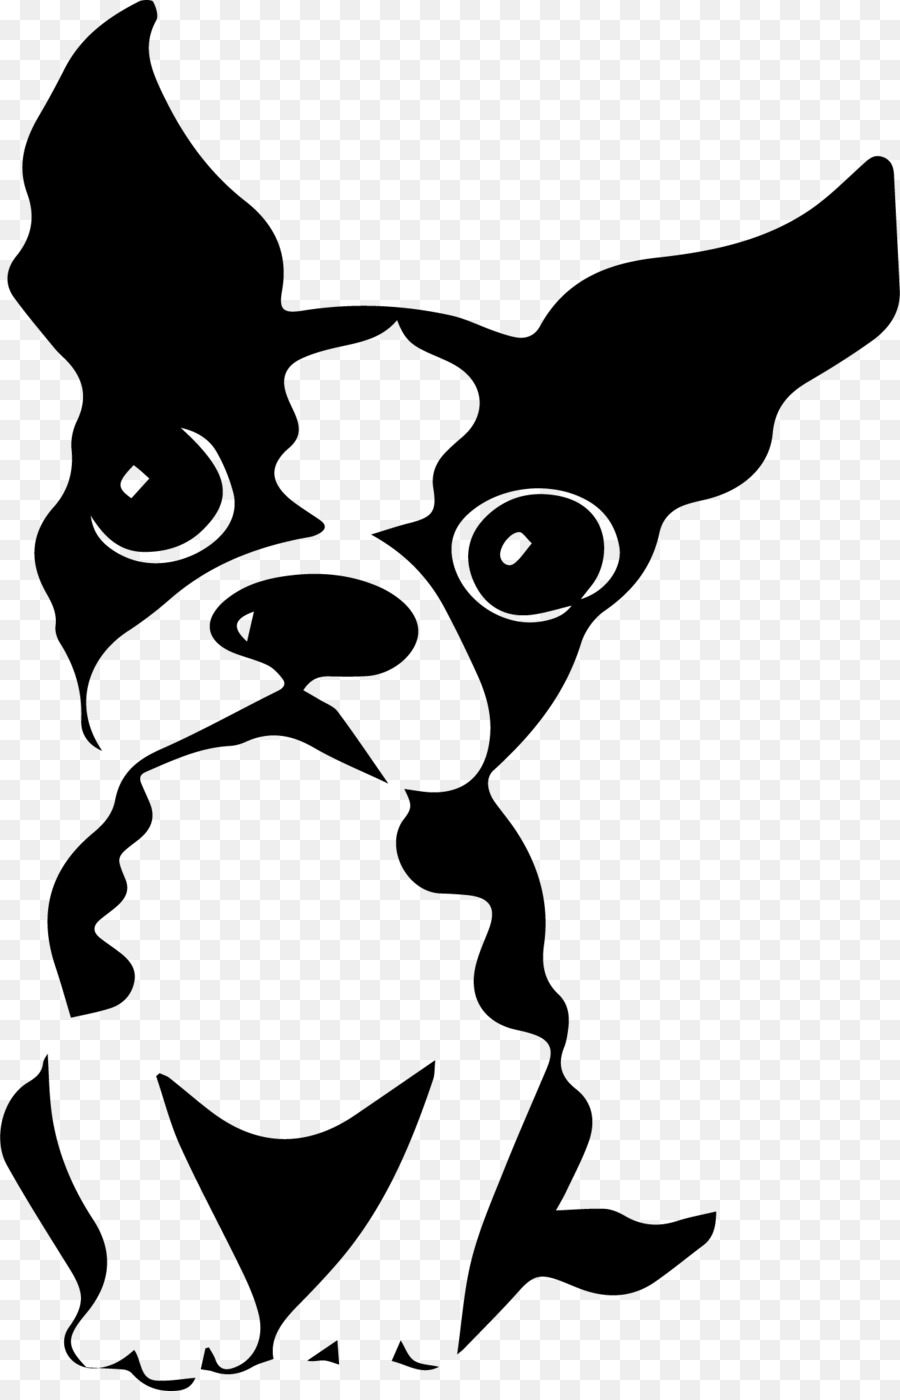 T-shirt Boston Terrier American Staffordshire Terrier At Your Service Grooming LLC The Barking Orange - the dog decal png download - 1290*1994 - Free Transparent Tshirt png Download.